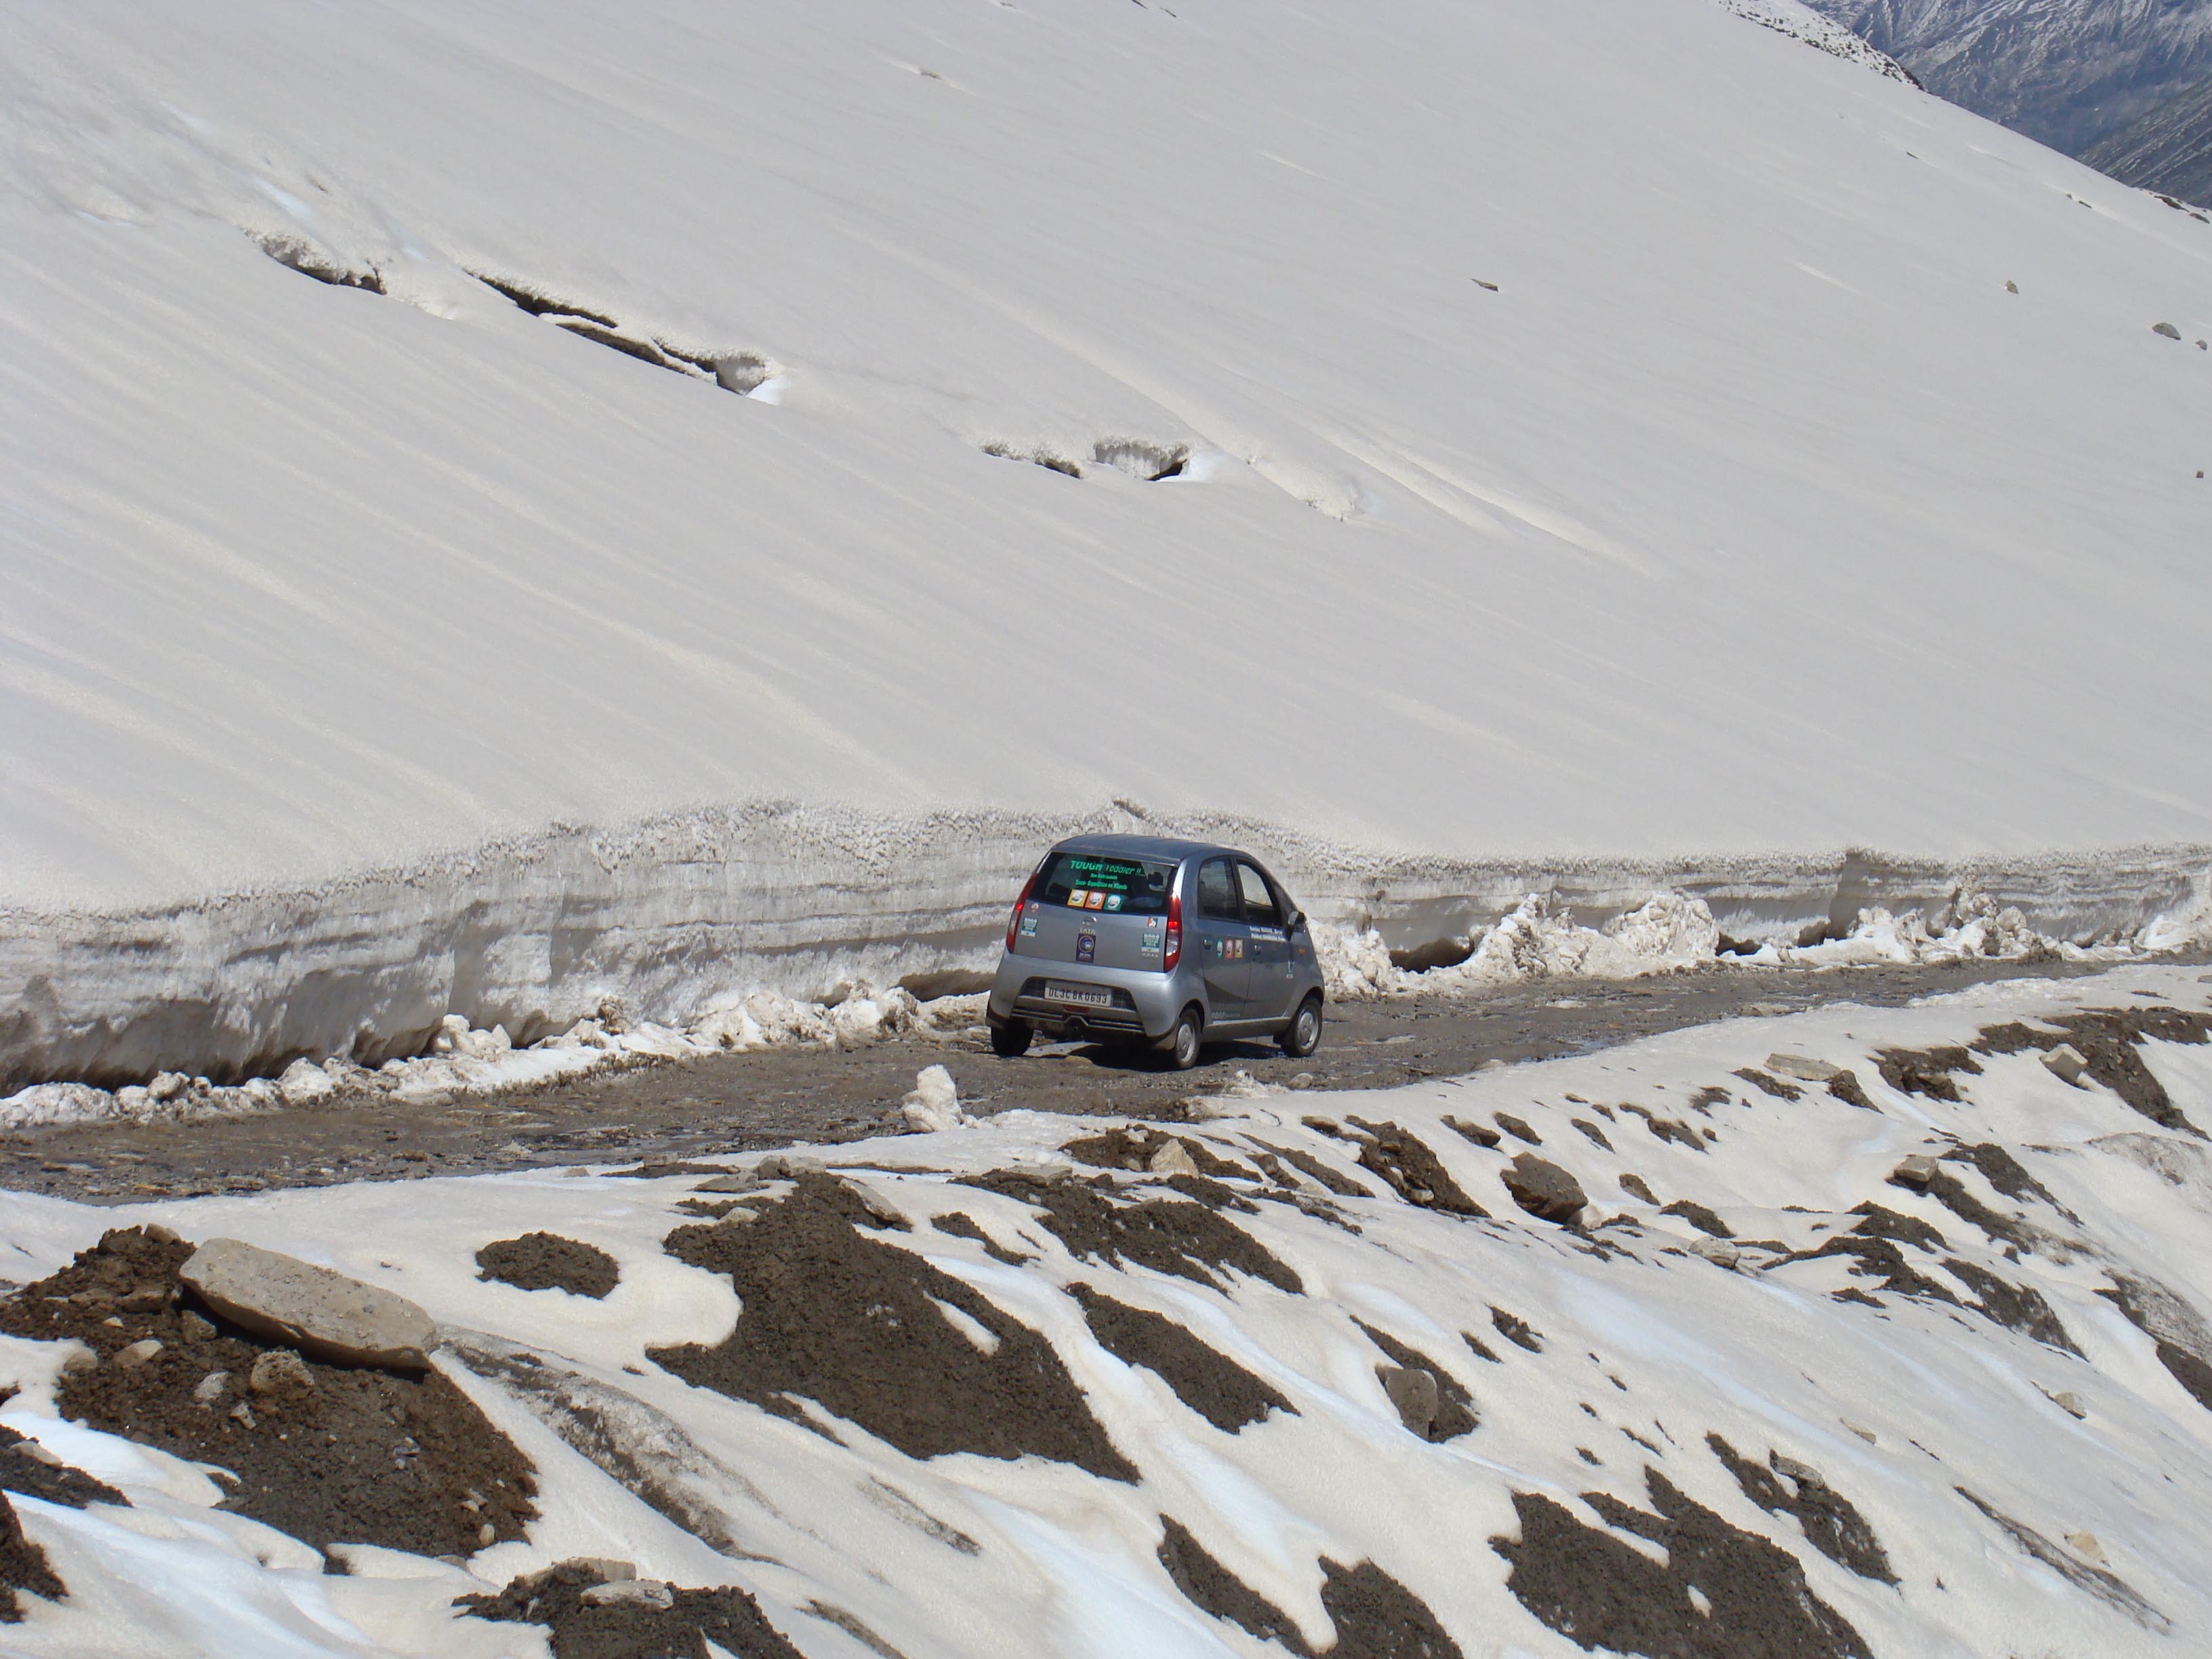 http://prasannaholidays.com/staging/wp-content/uploads/2014/05/Just-crossed-Rohtang-Pass.jpg